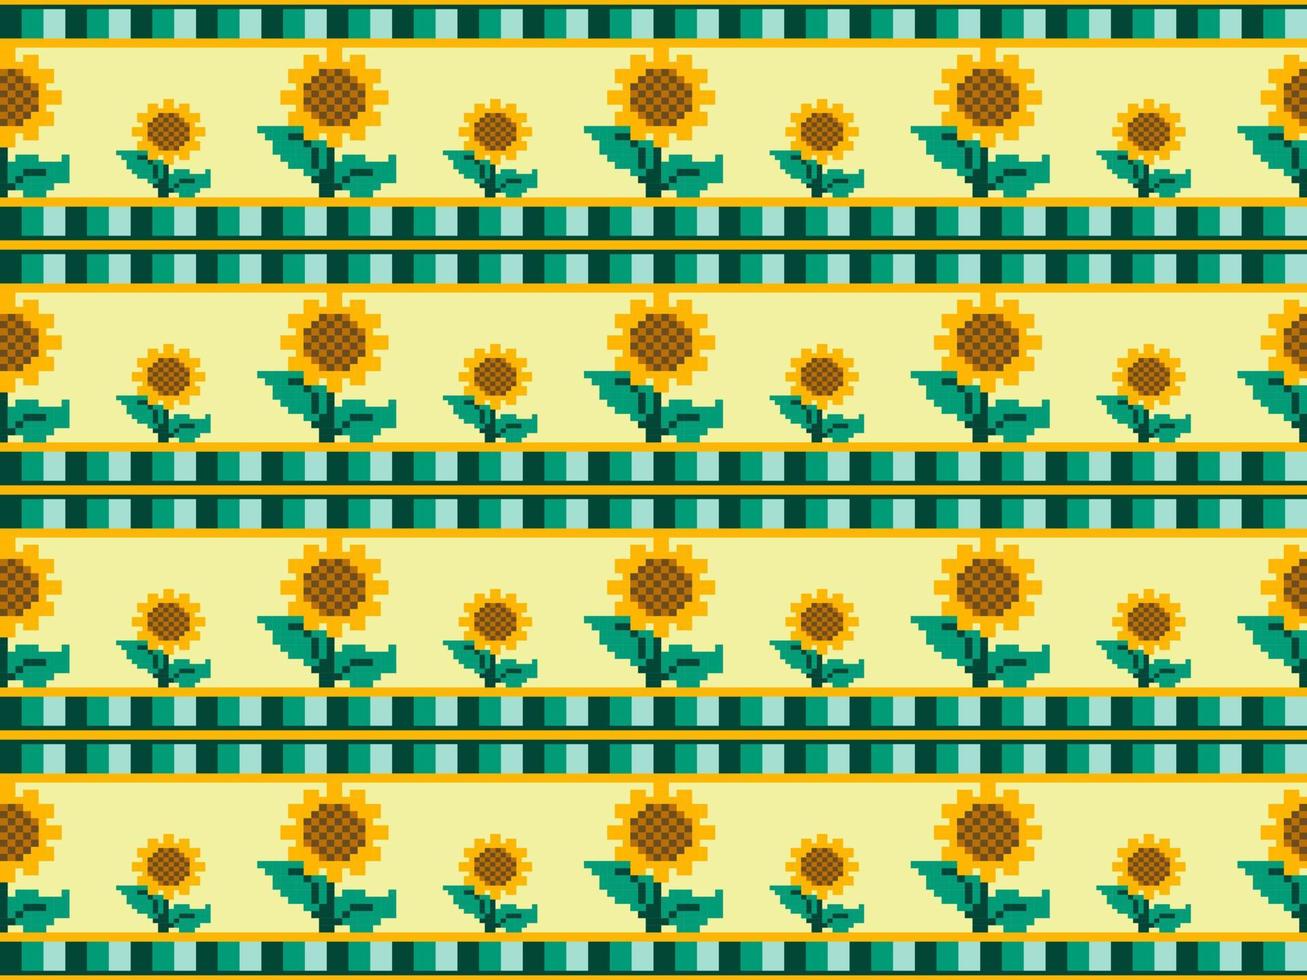 Sunflower plant pixel pattern on yellow background vector